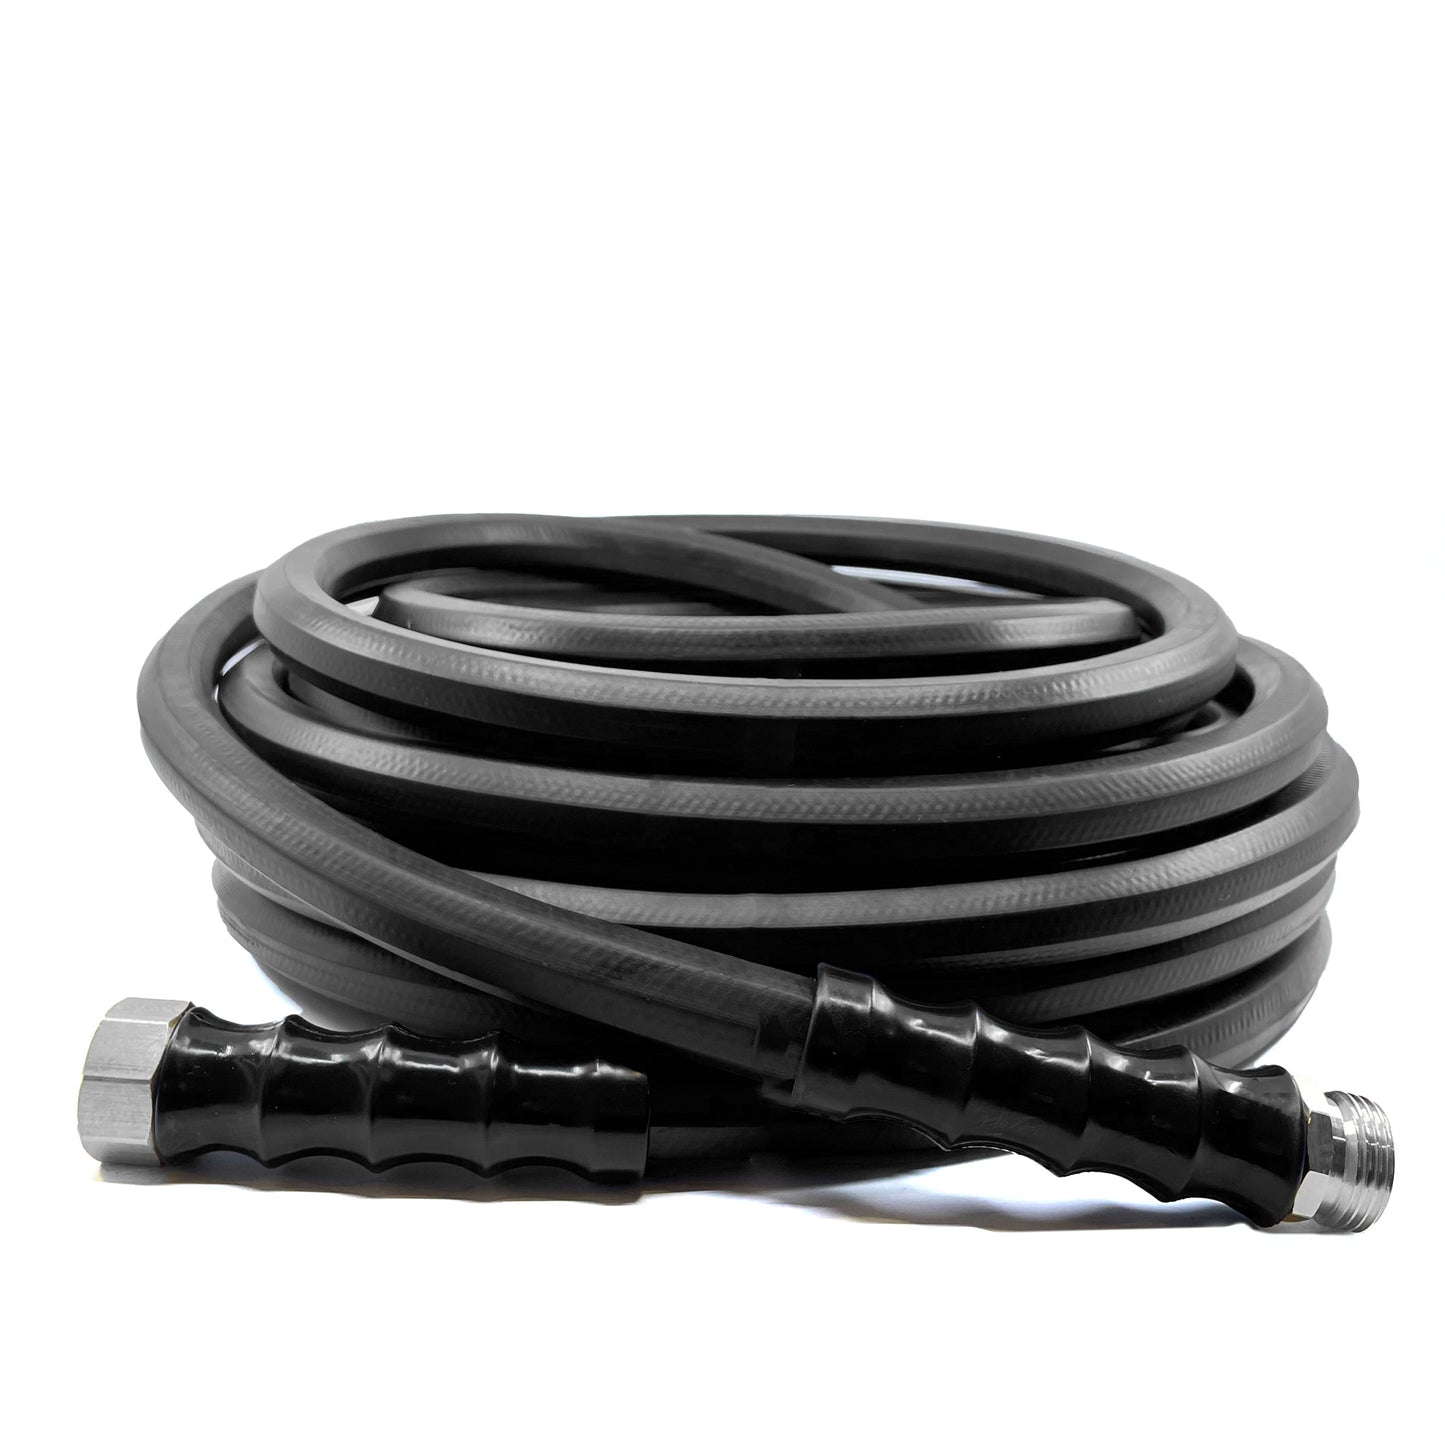 Avagard 13mm x 15m Rubber Water hose, Contractor Grade, UV Resistant, Anti-Kink